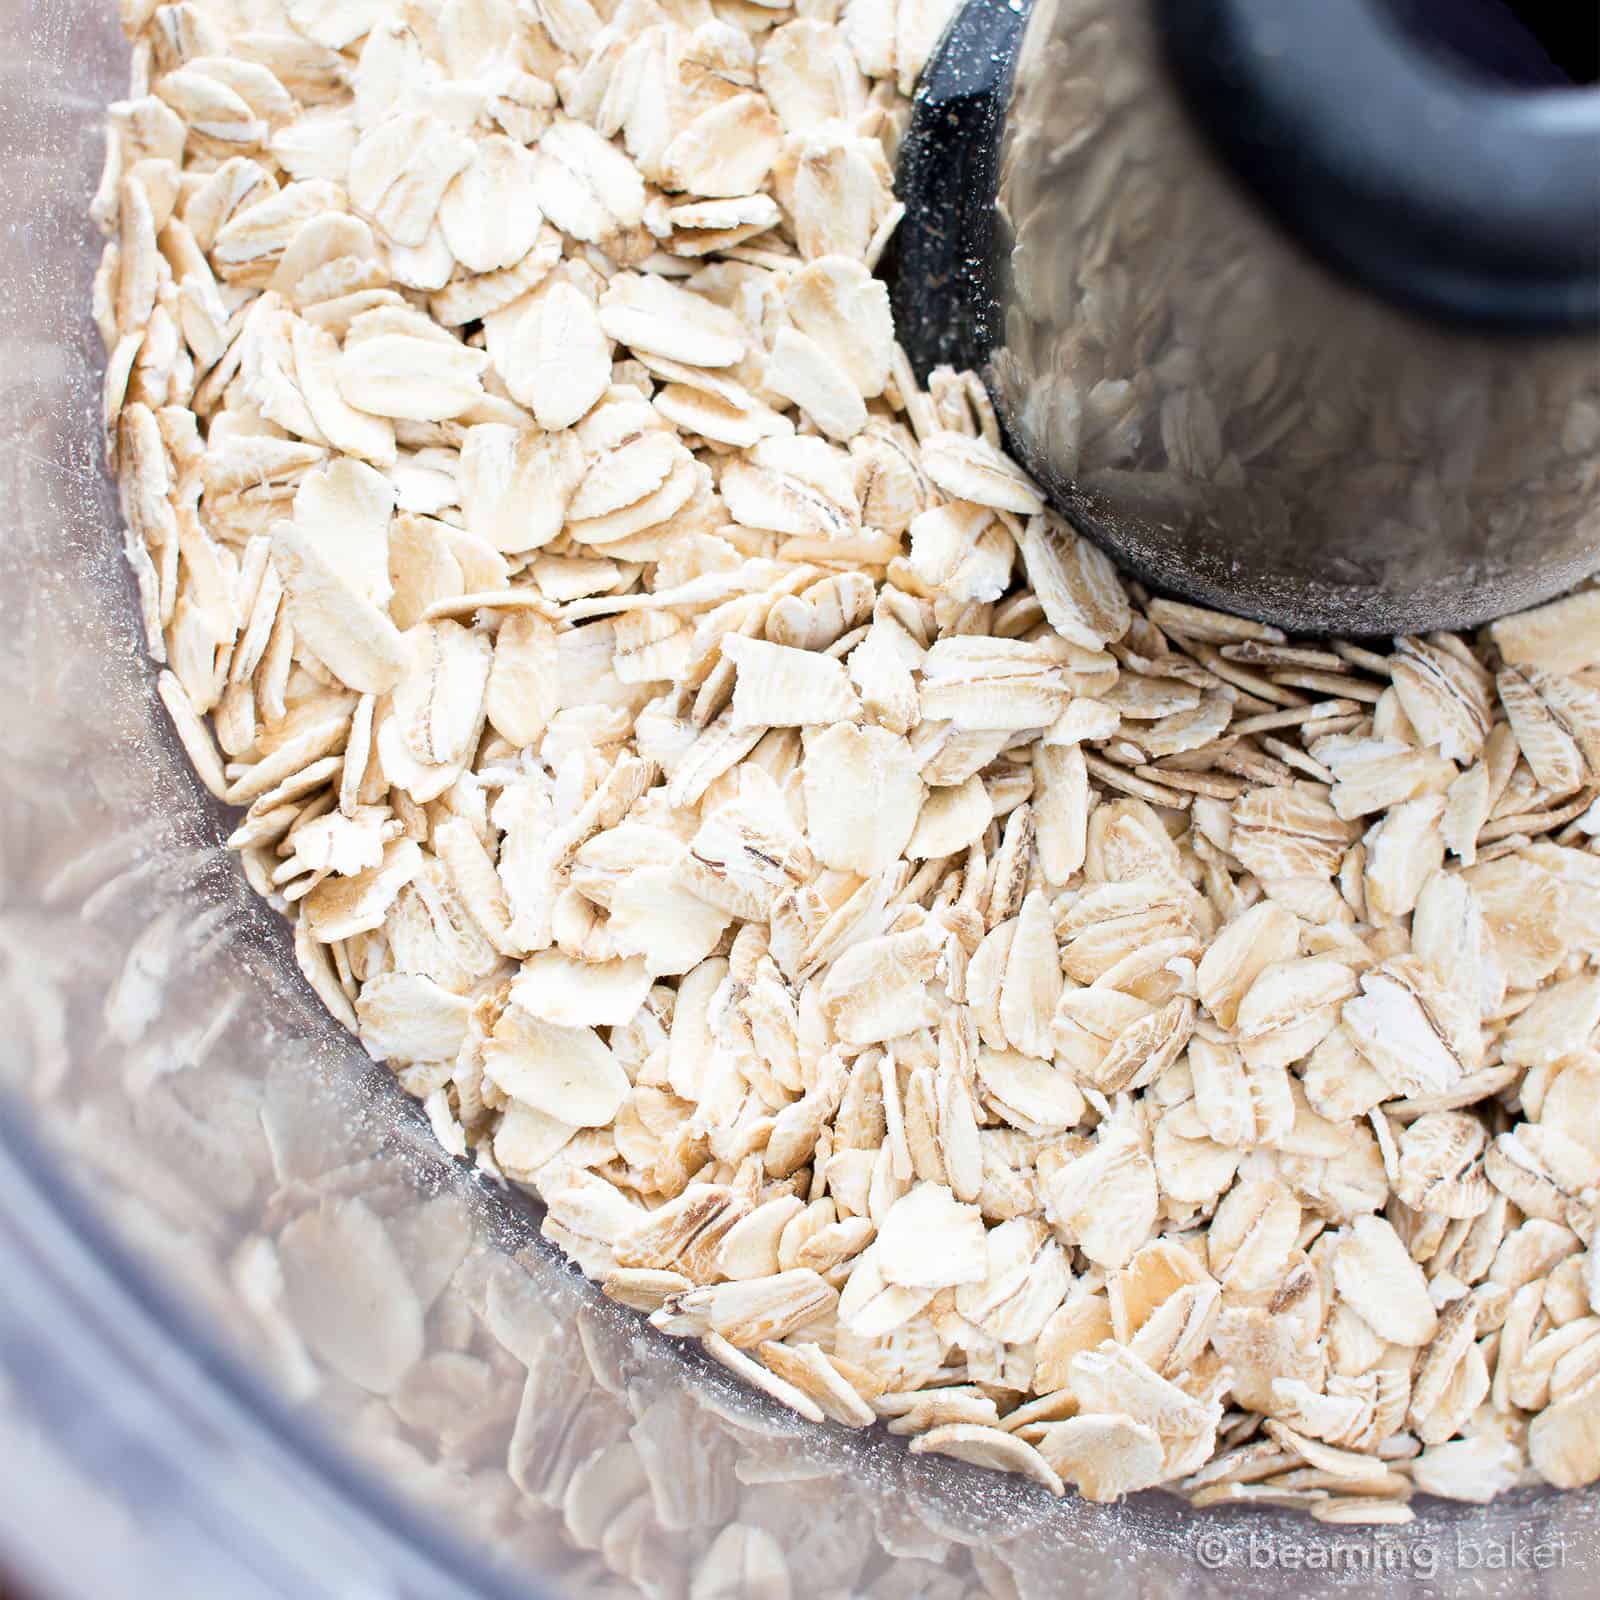 Old fashioned gluten free oats in a food processor